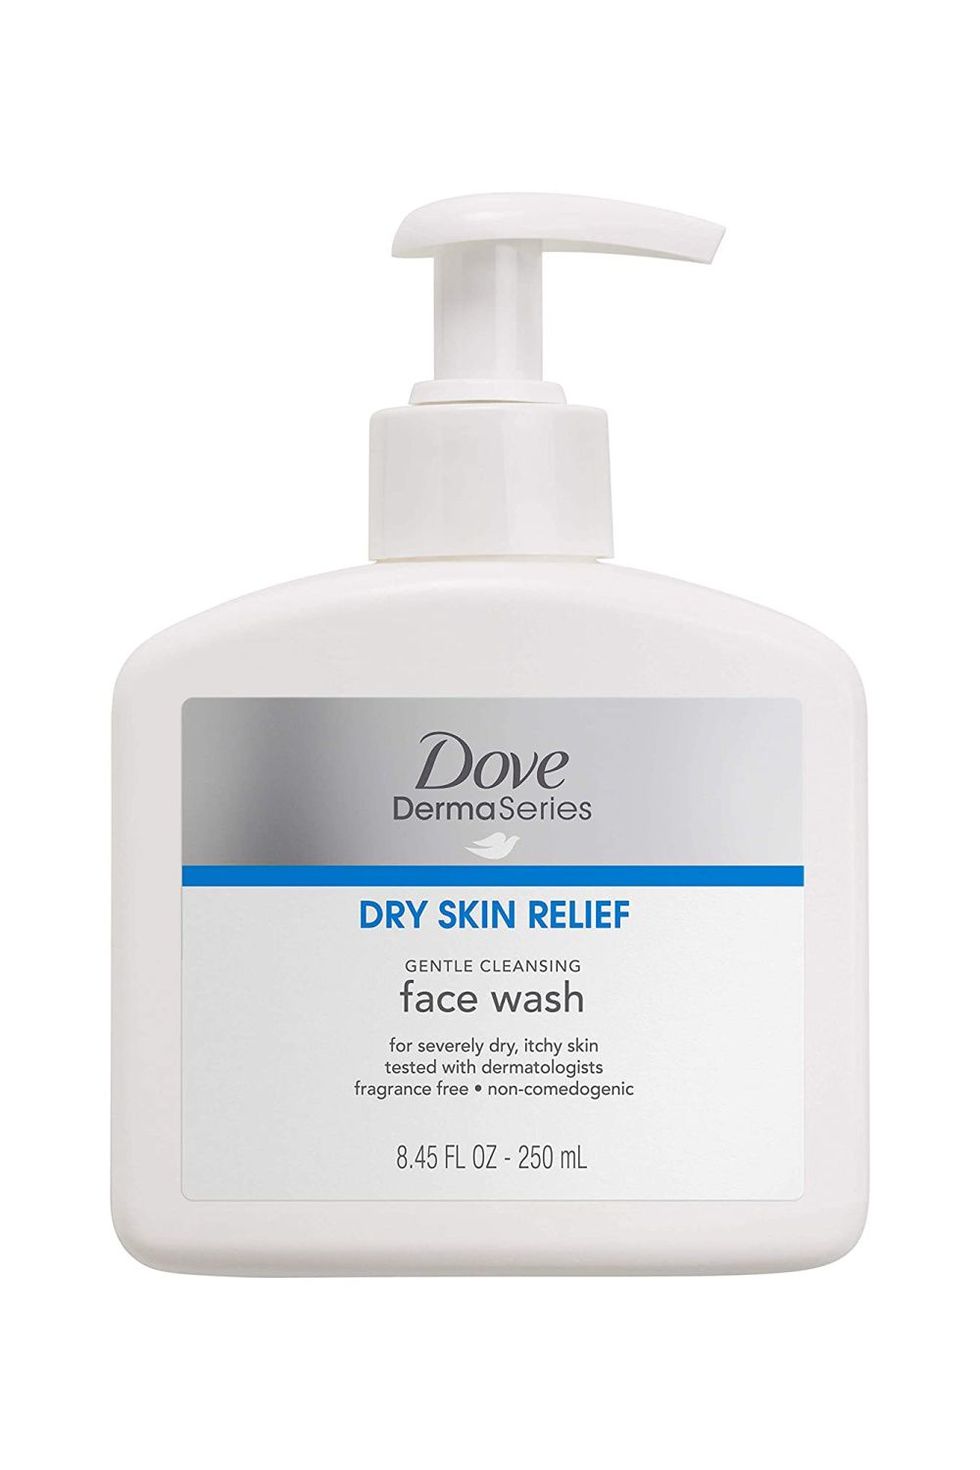 Dove DermaSeries Dry Skin Relief Gentle Cleansing Face Wash